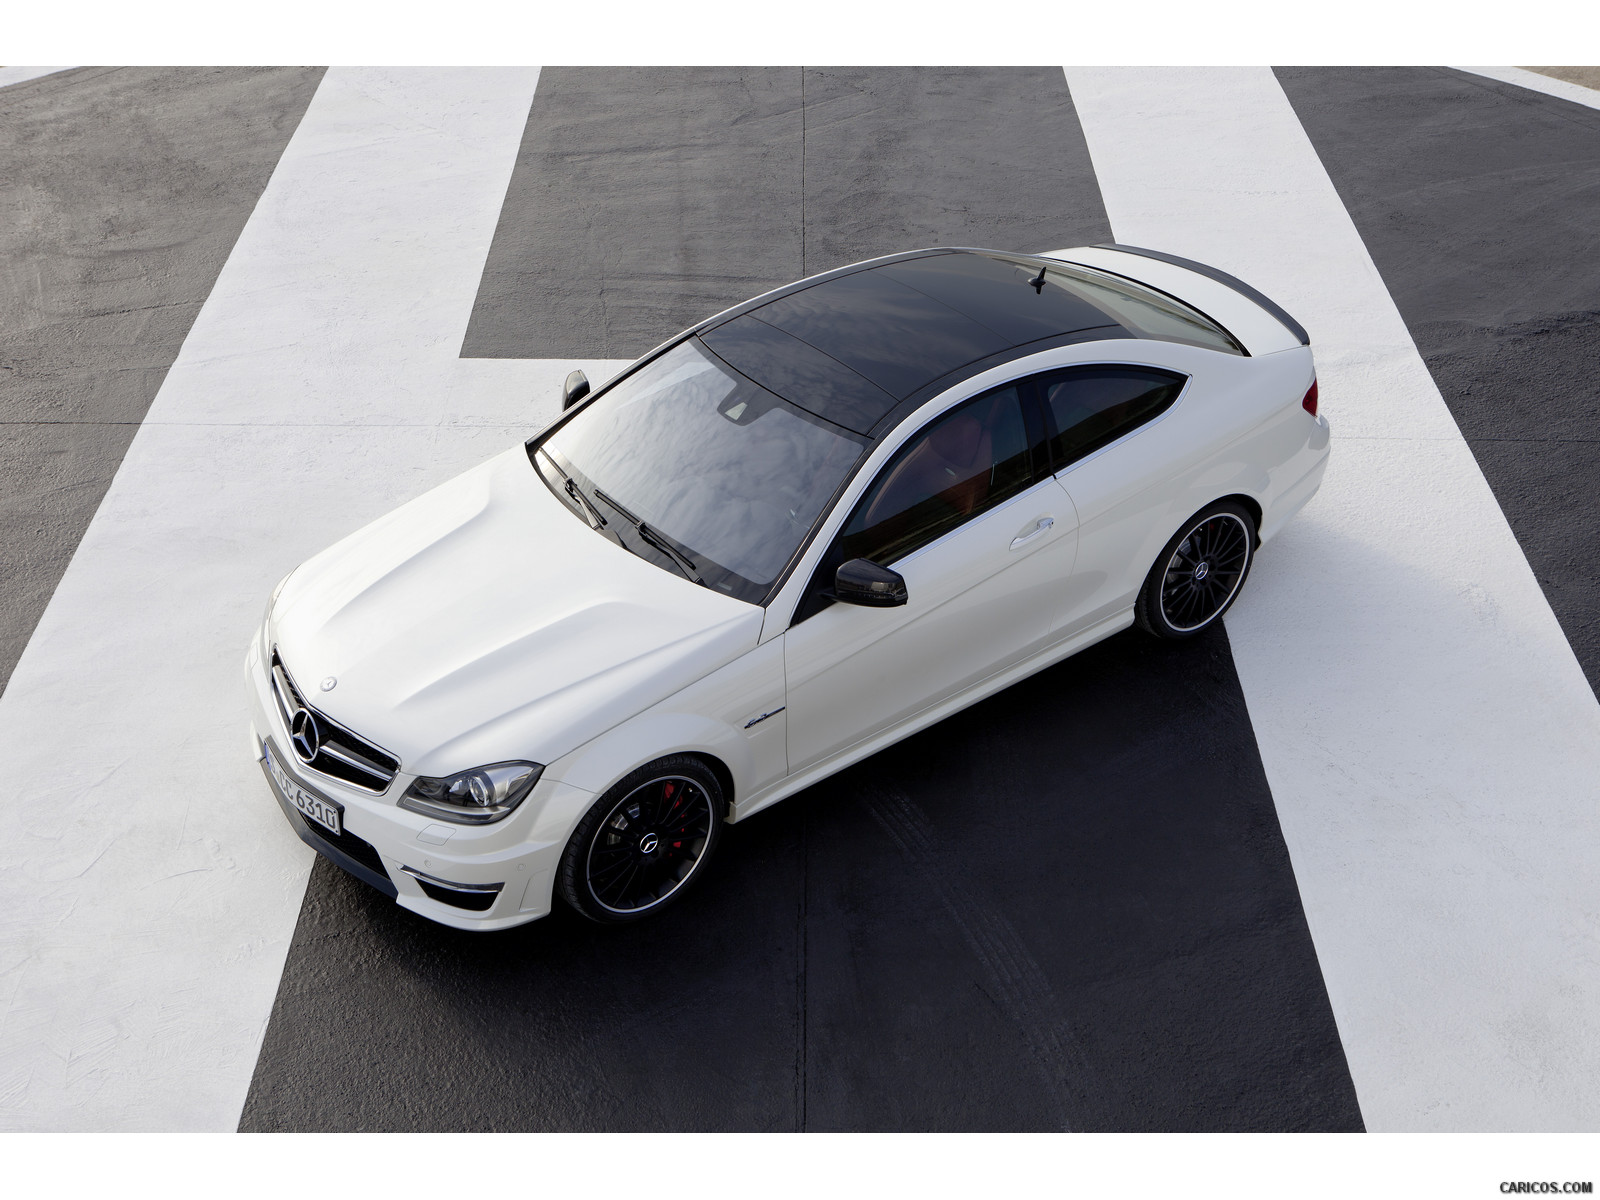 Mercedes-Benz C63 AMG Coupe (2012)  - Top, #35 of 64